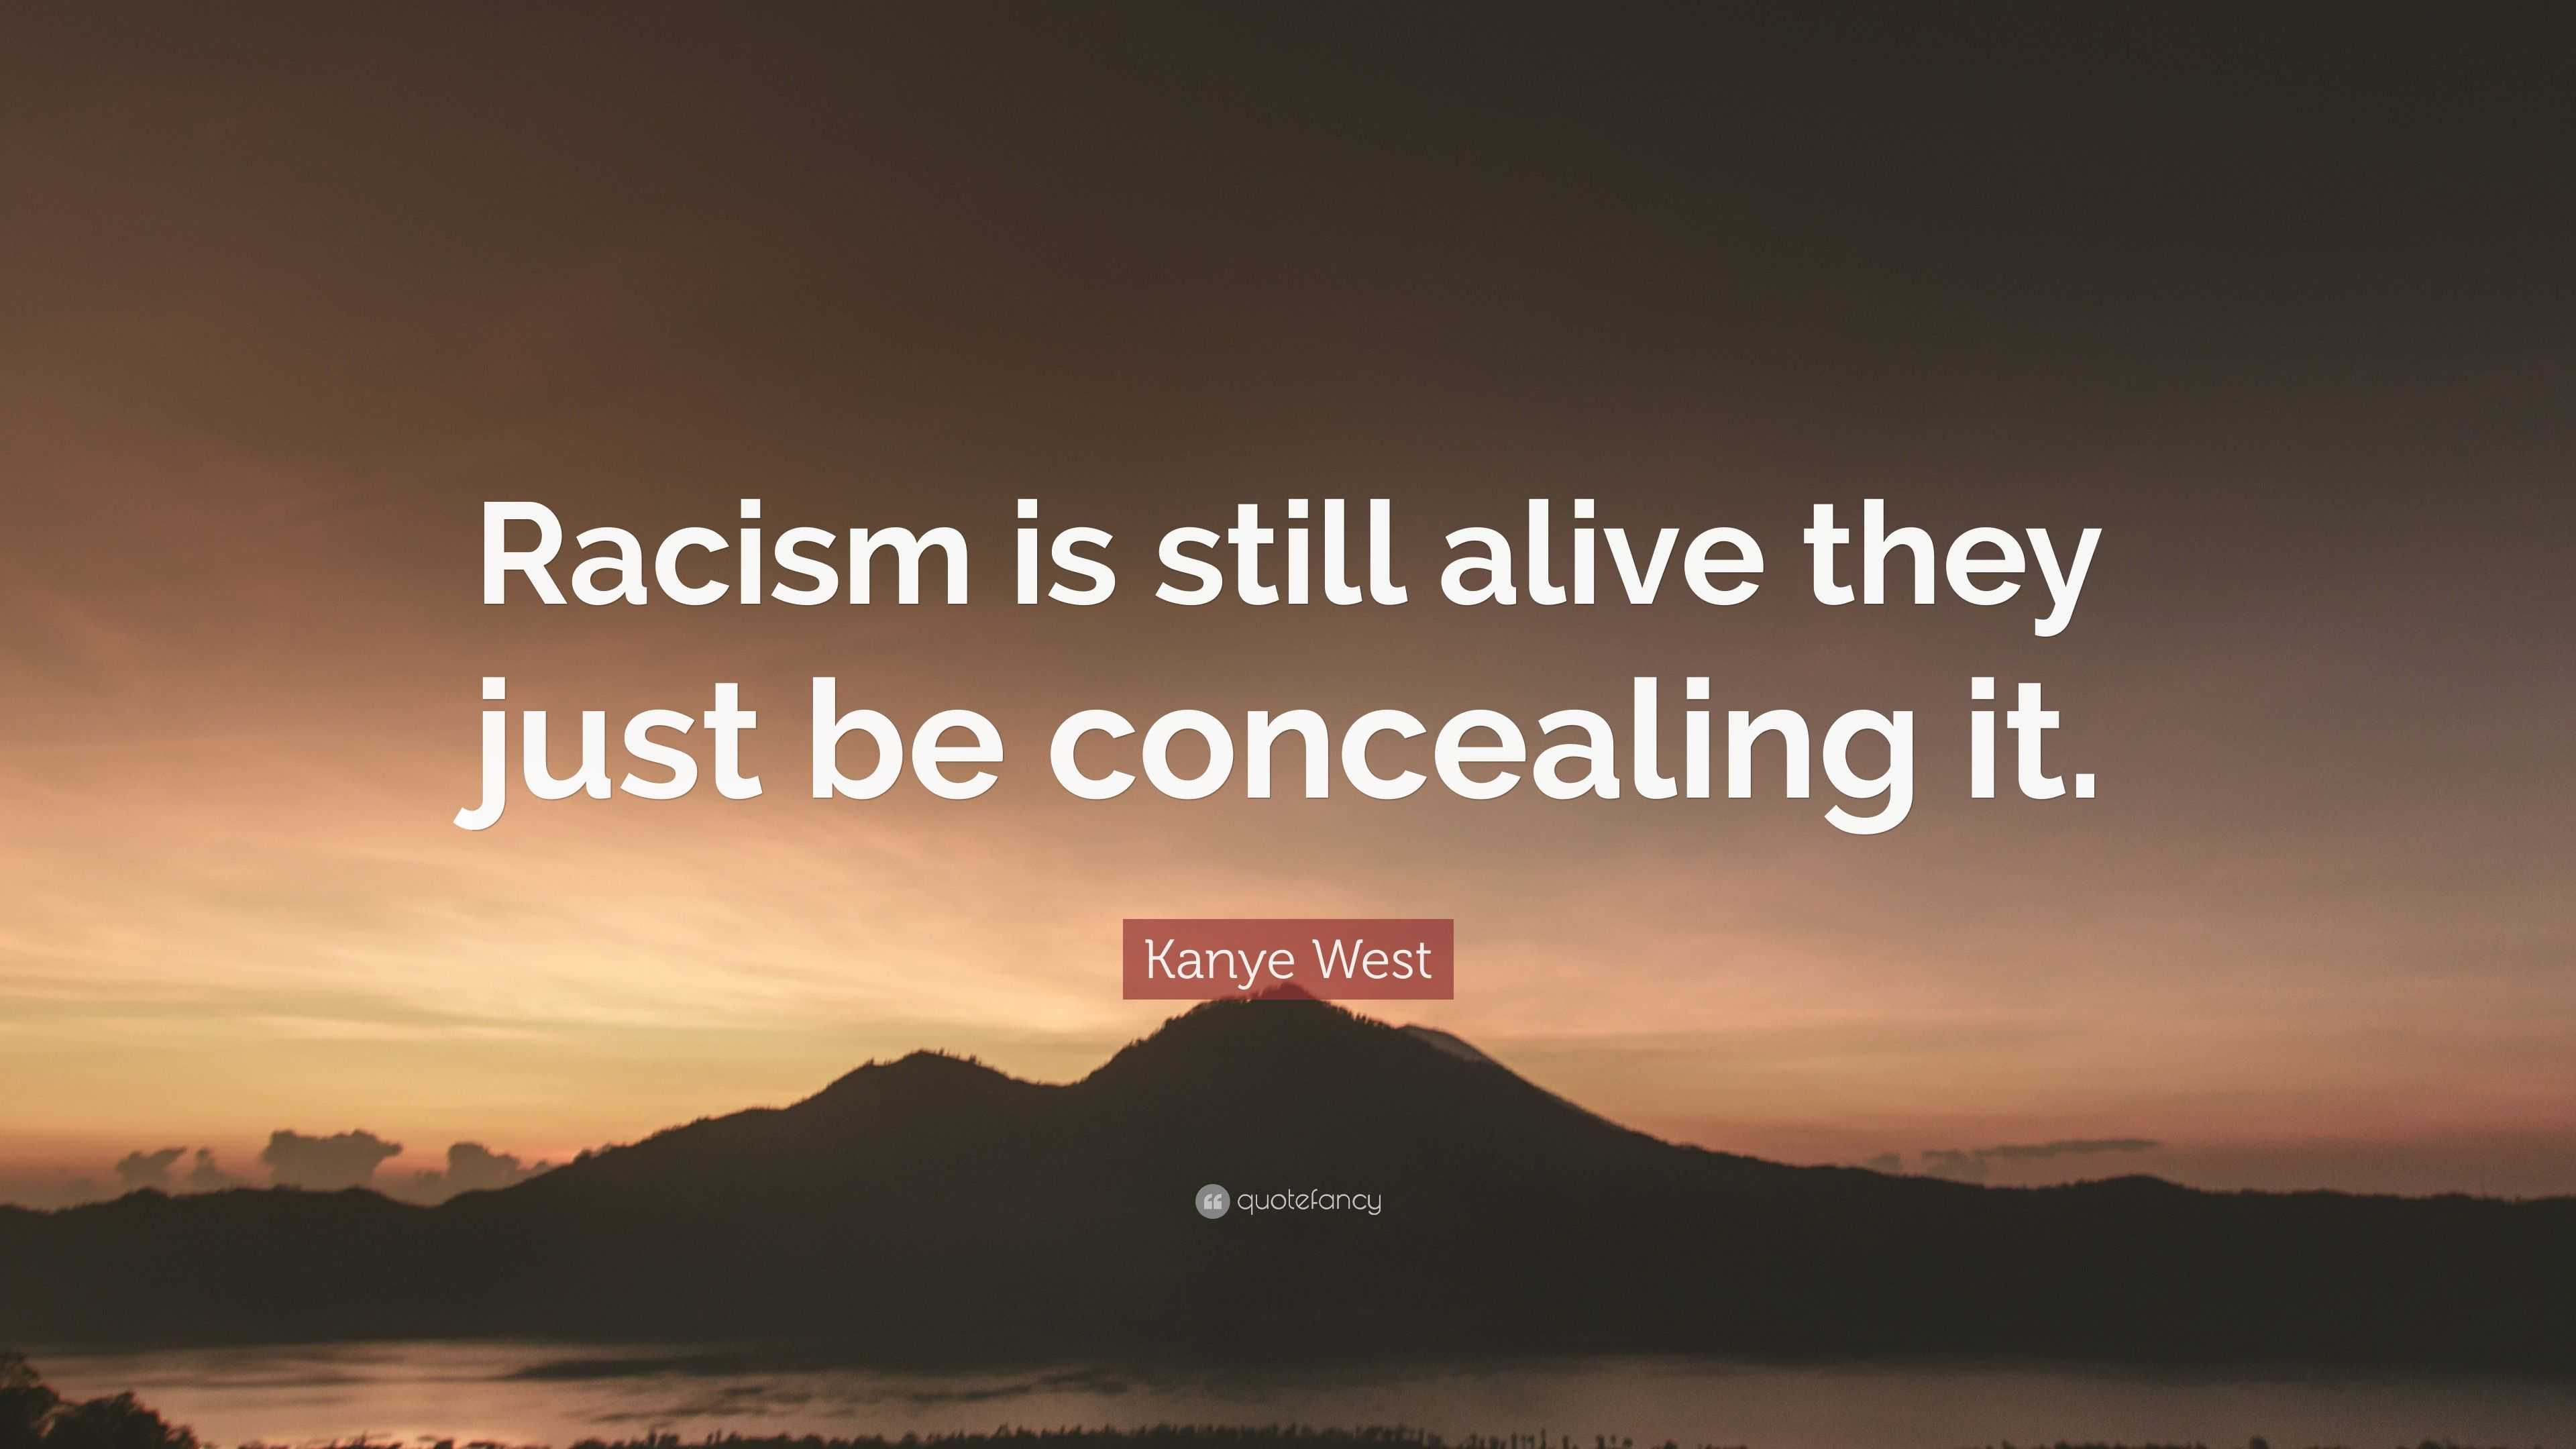 Kanye West Quote: “Racism is still alive they just be concealing it.”